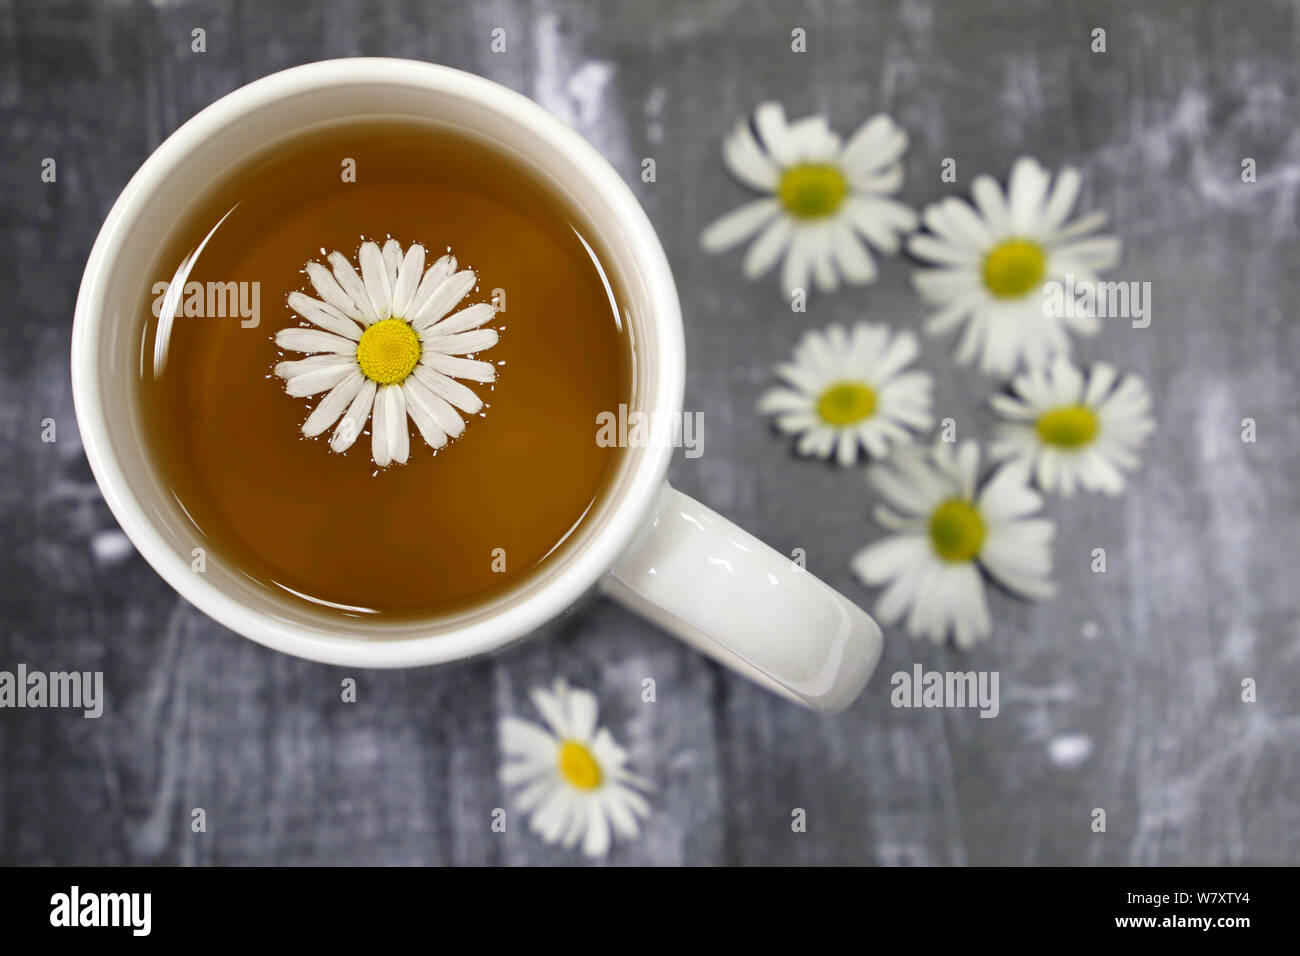 Chamomile tea in a white cup and daisy flowers on a dark wooden table, healing herbal drink Stock Photo